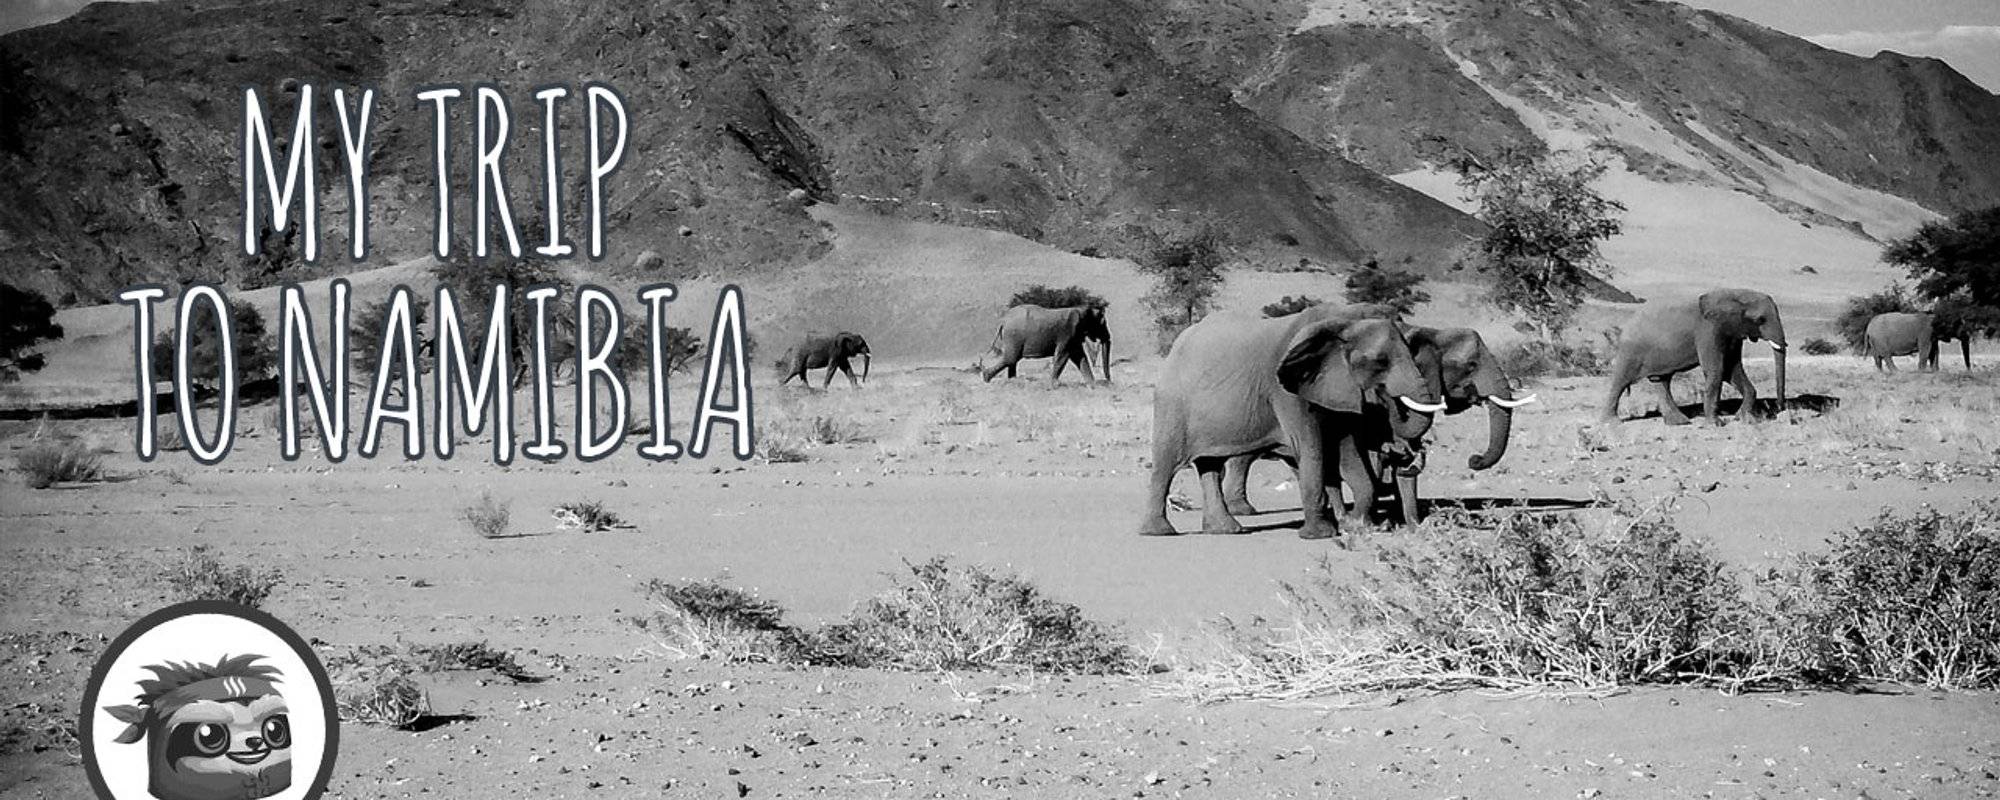 My trip to Namibia (4): African landscapes in black and white